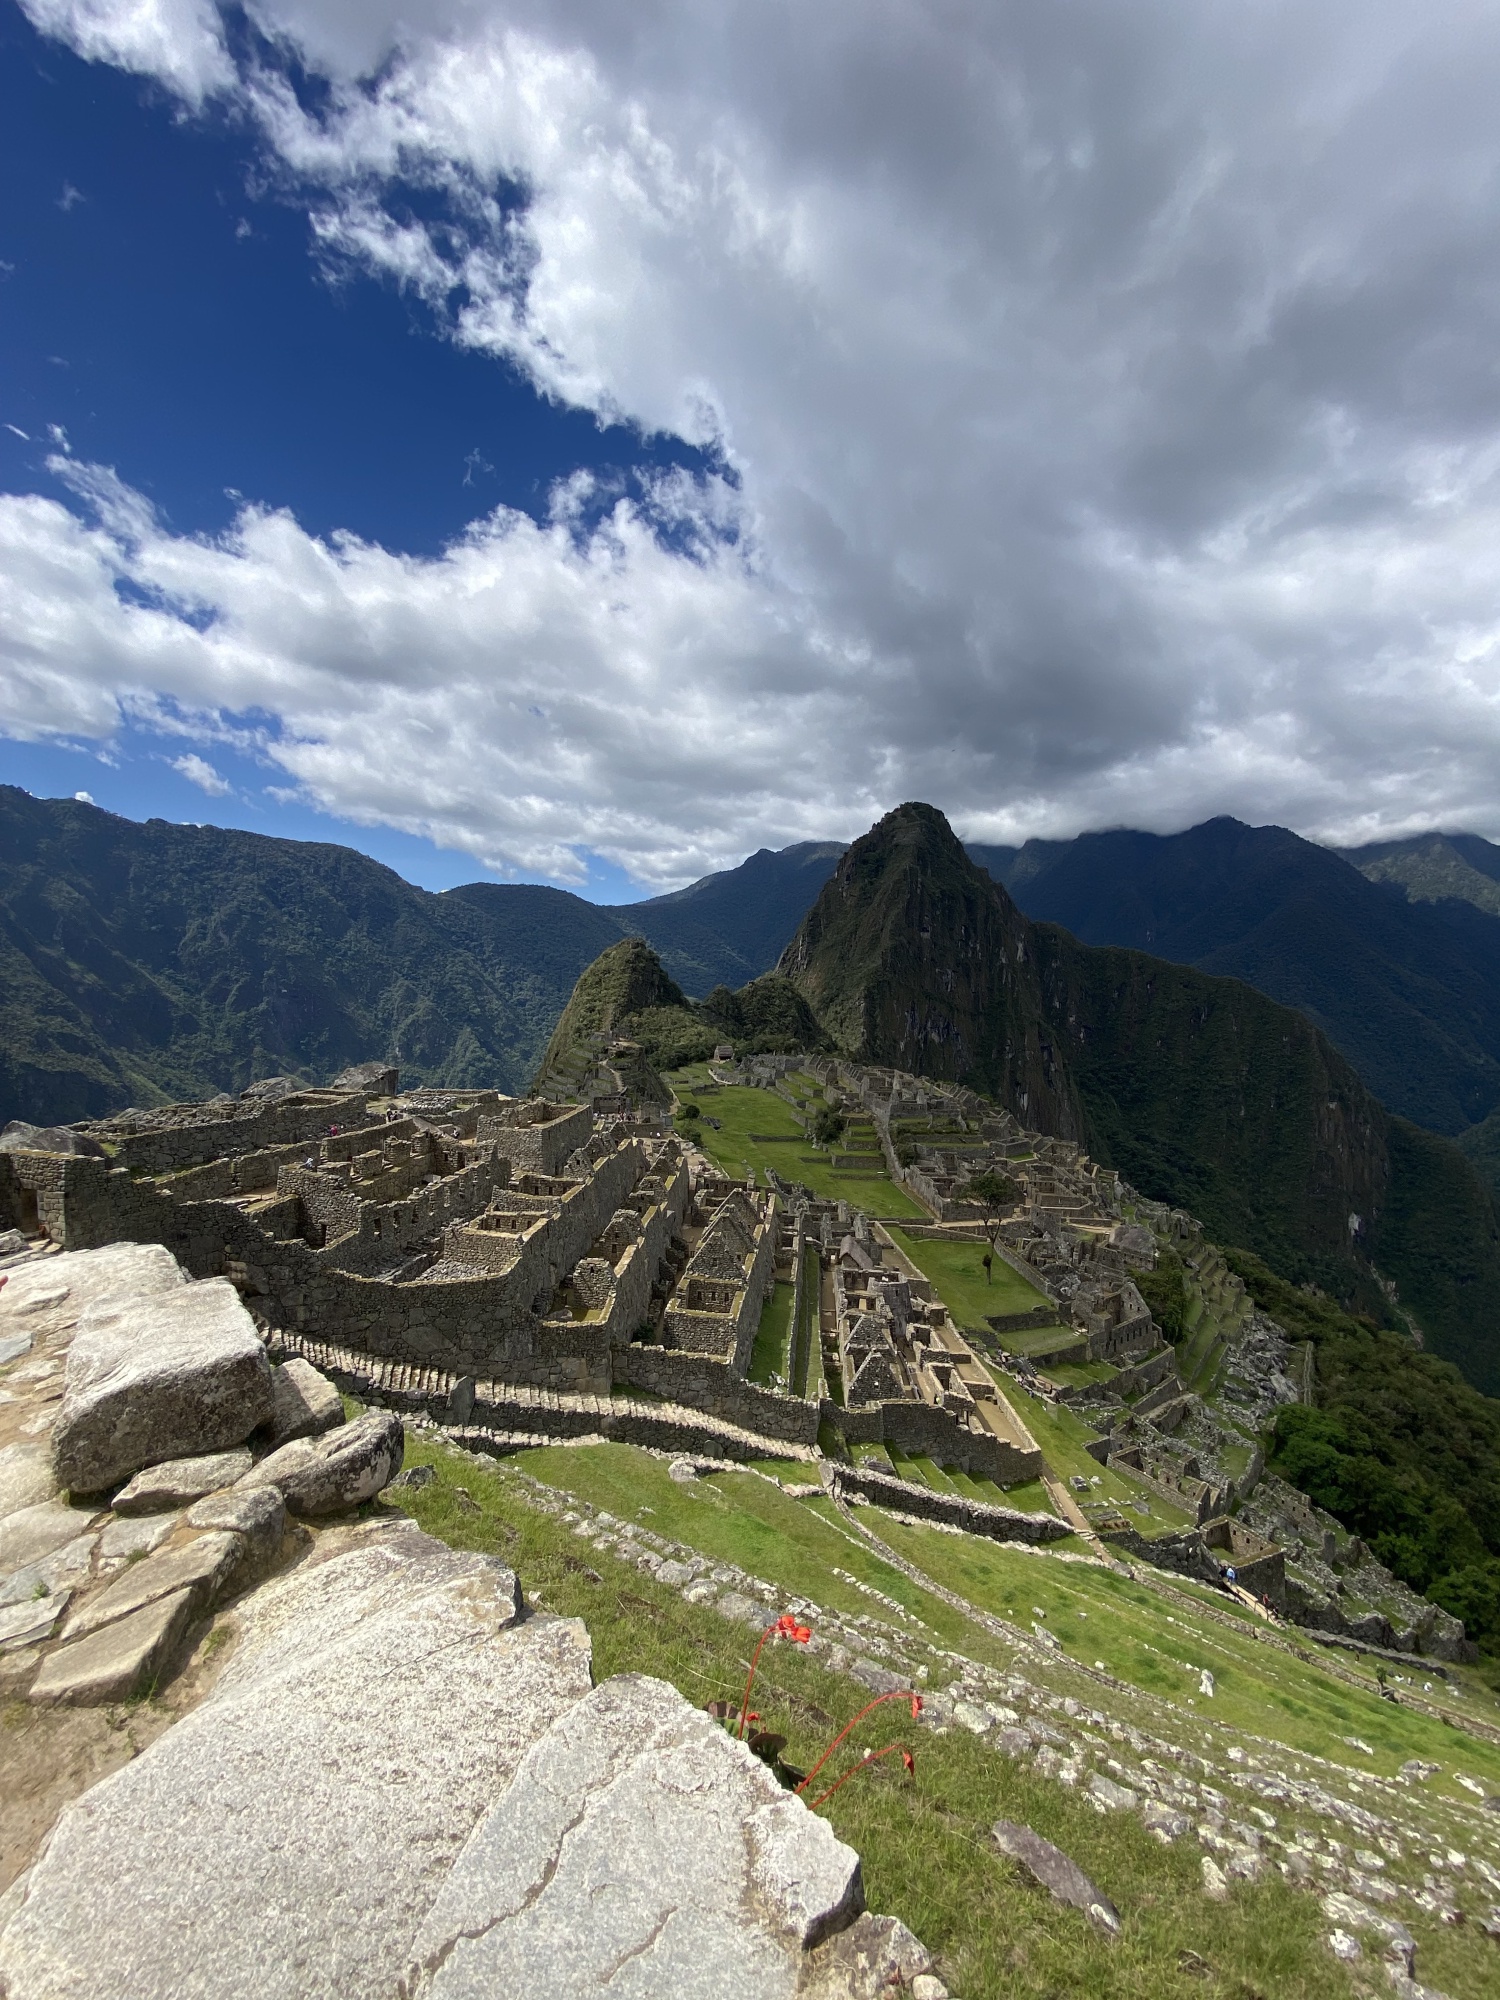 Machu Picchu is divided into two sectors - agricultural where thew grew crops, and urban where they have sacred ceremonies